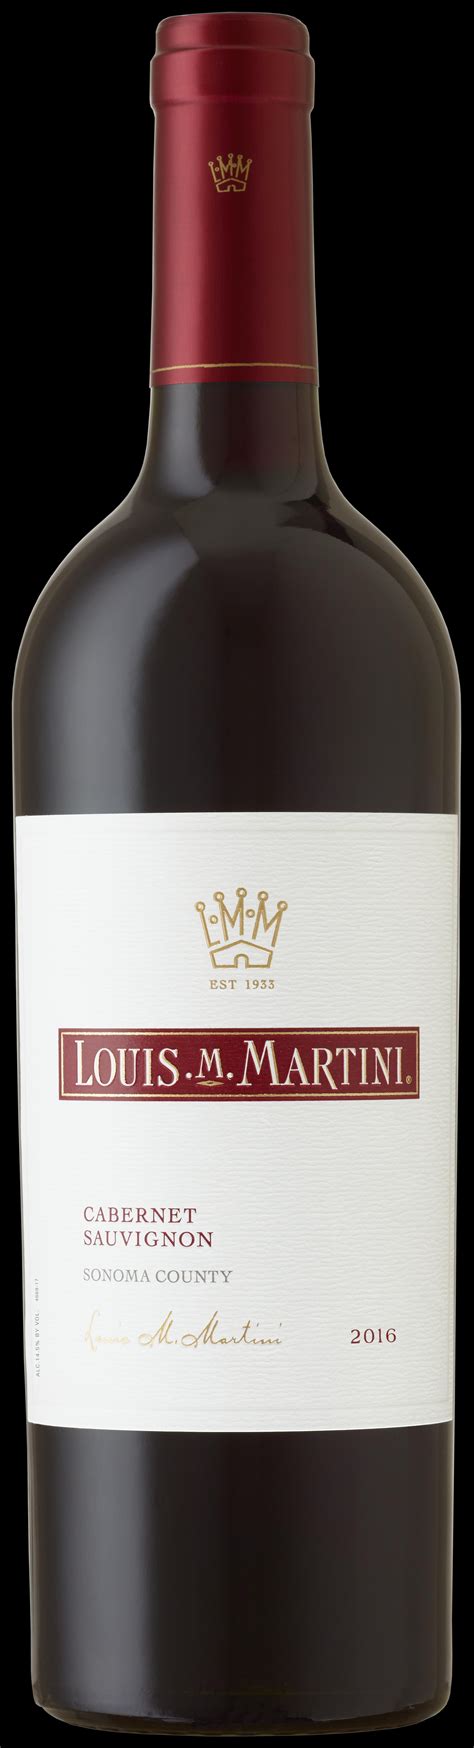 Louis m martini. Jul 25, 2022 · Louis M. Martini Winery produces exceptional Cabernet Sauvignons. A pioneer in Napa Valley wines, Louis M. Martini sold sacramental wine and wine concentrate for home winemaking during Prohibition ... 